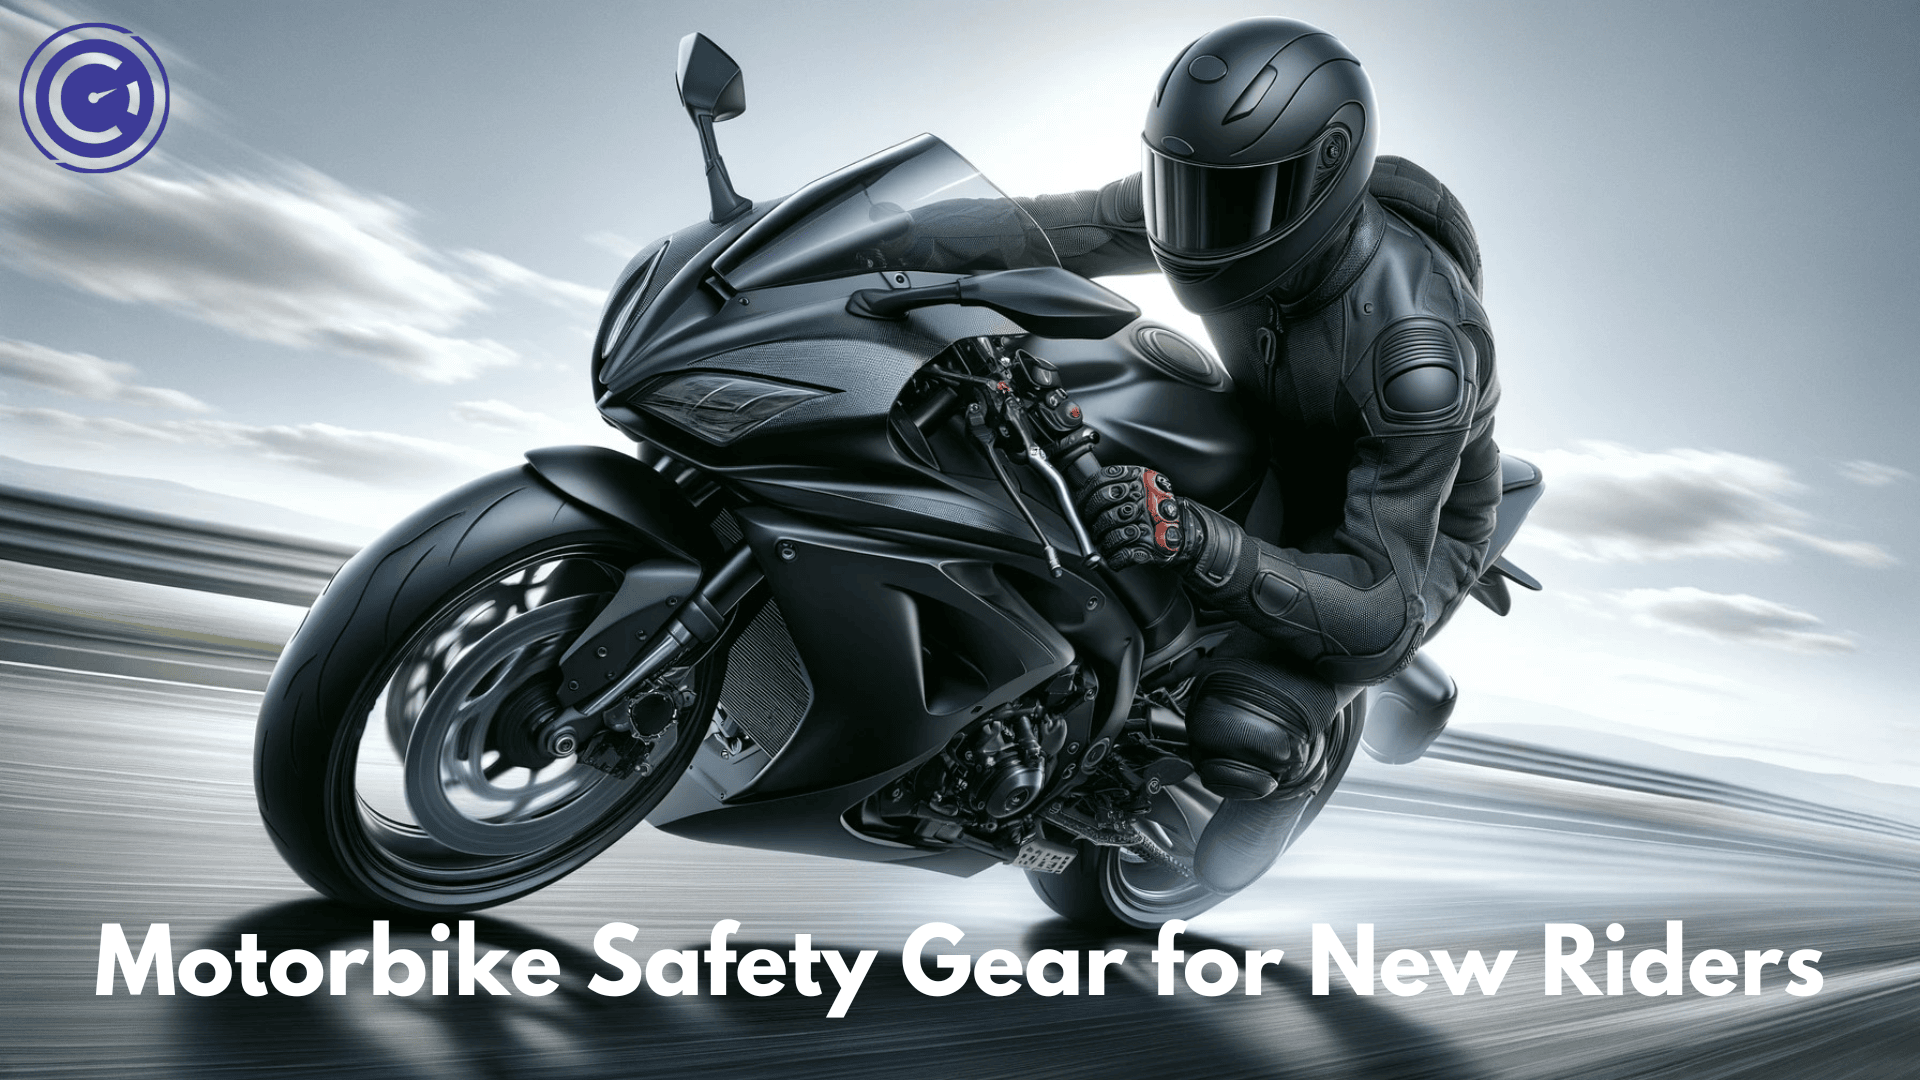 Motorbike Safety Gear for New Riders